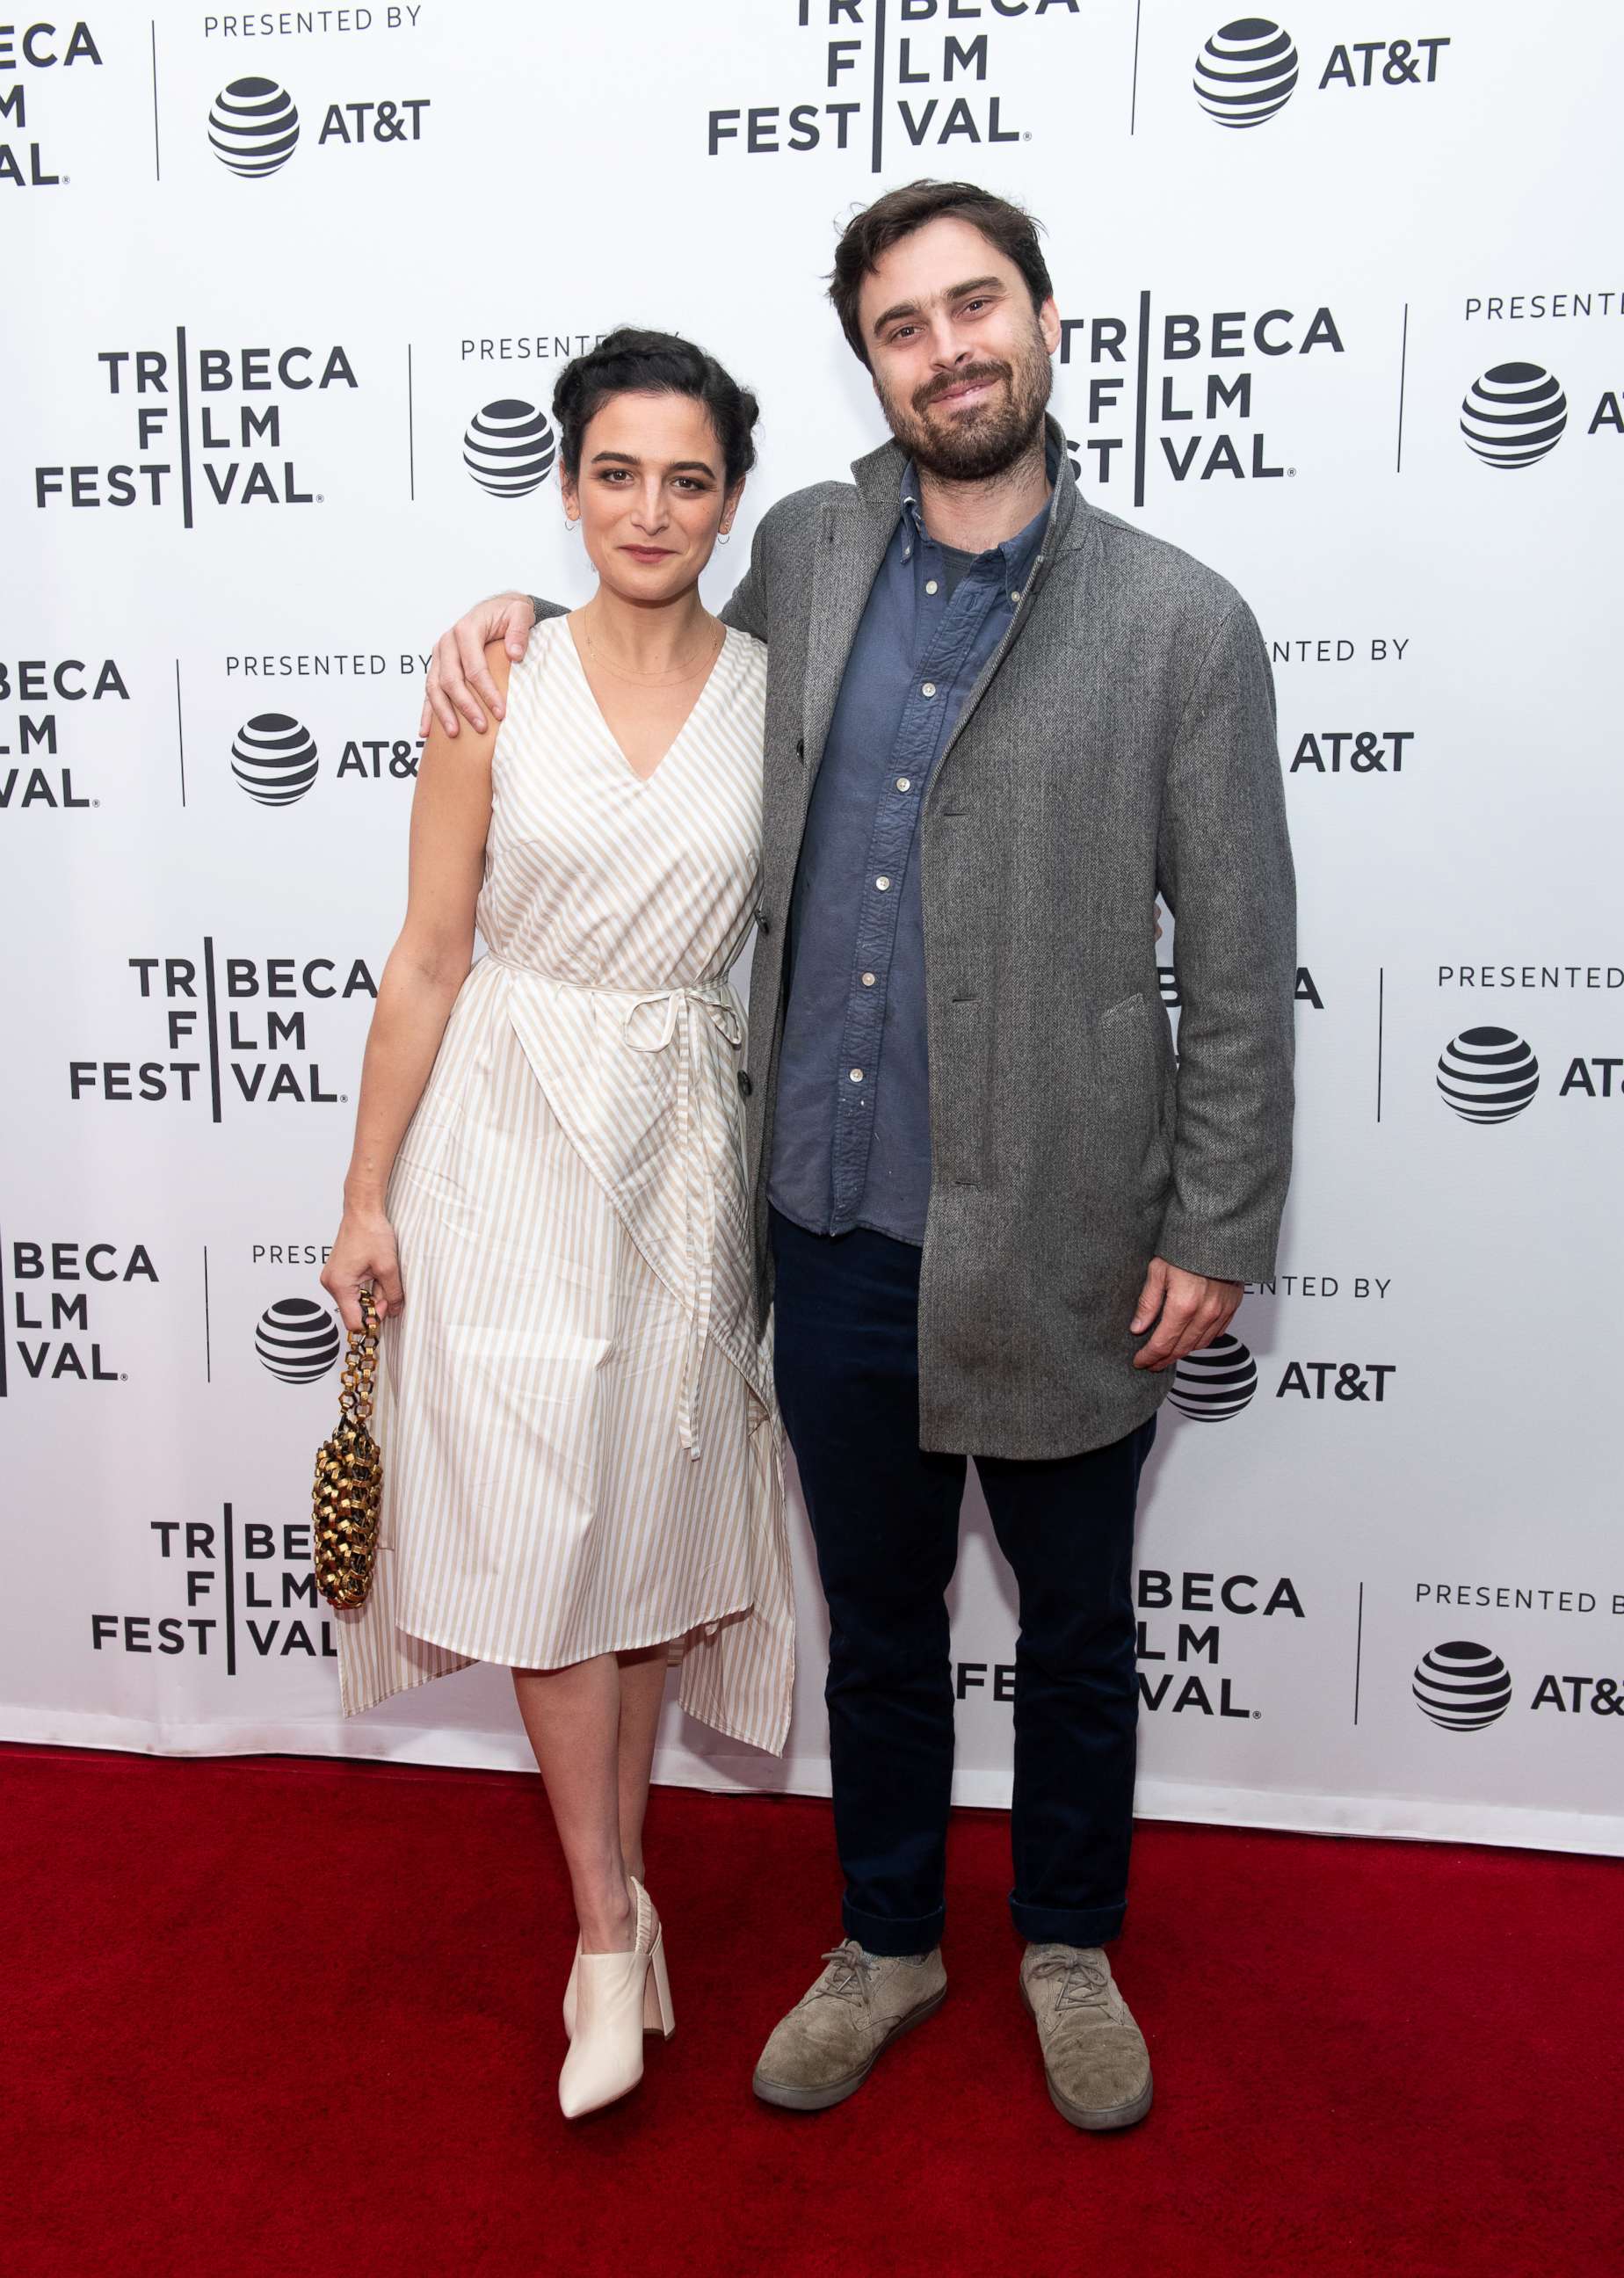 PHOTO: Jenny Slate and Ben Shattuck during the 2019 Tribeca Film Festival at SVA Theater, May 4, 2019, in New York City.